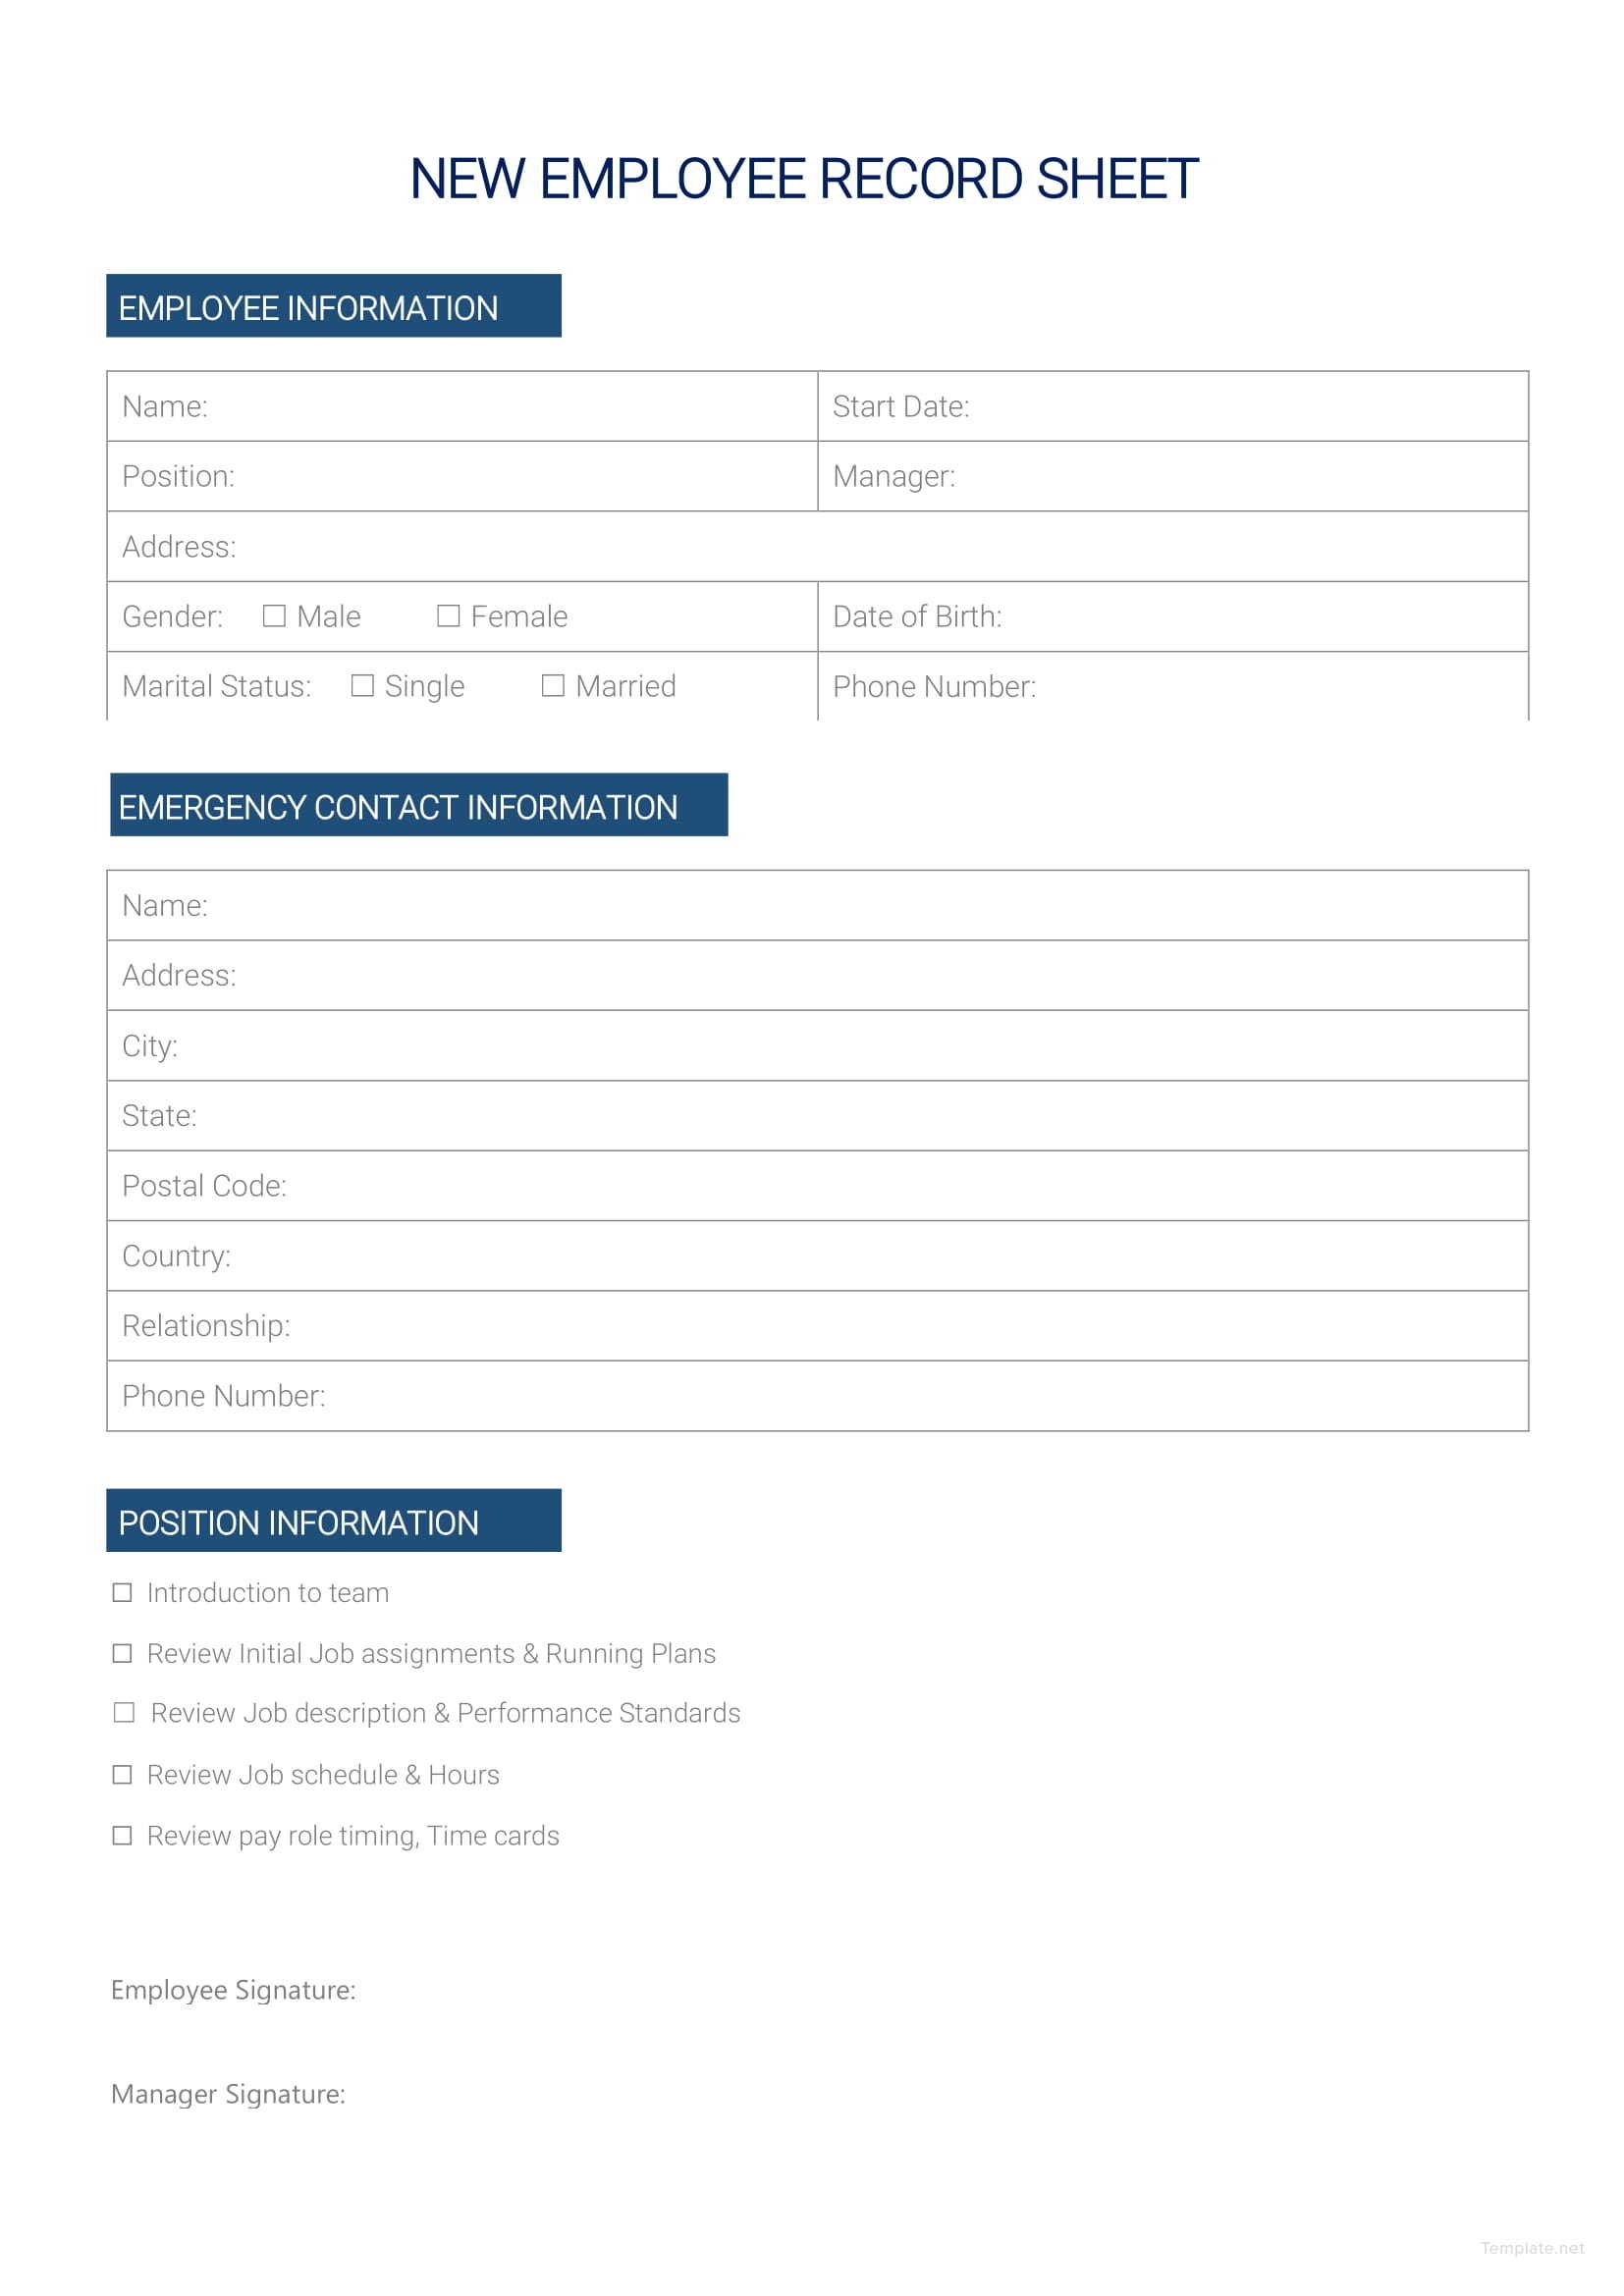 New Employee Record Sheet Template in Microsoft Word Template net